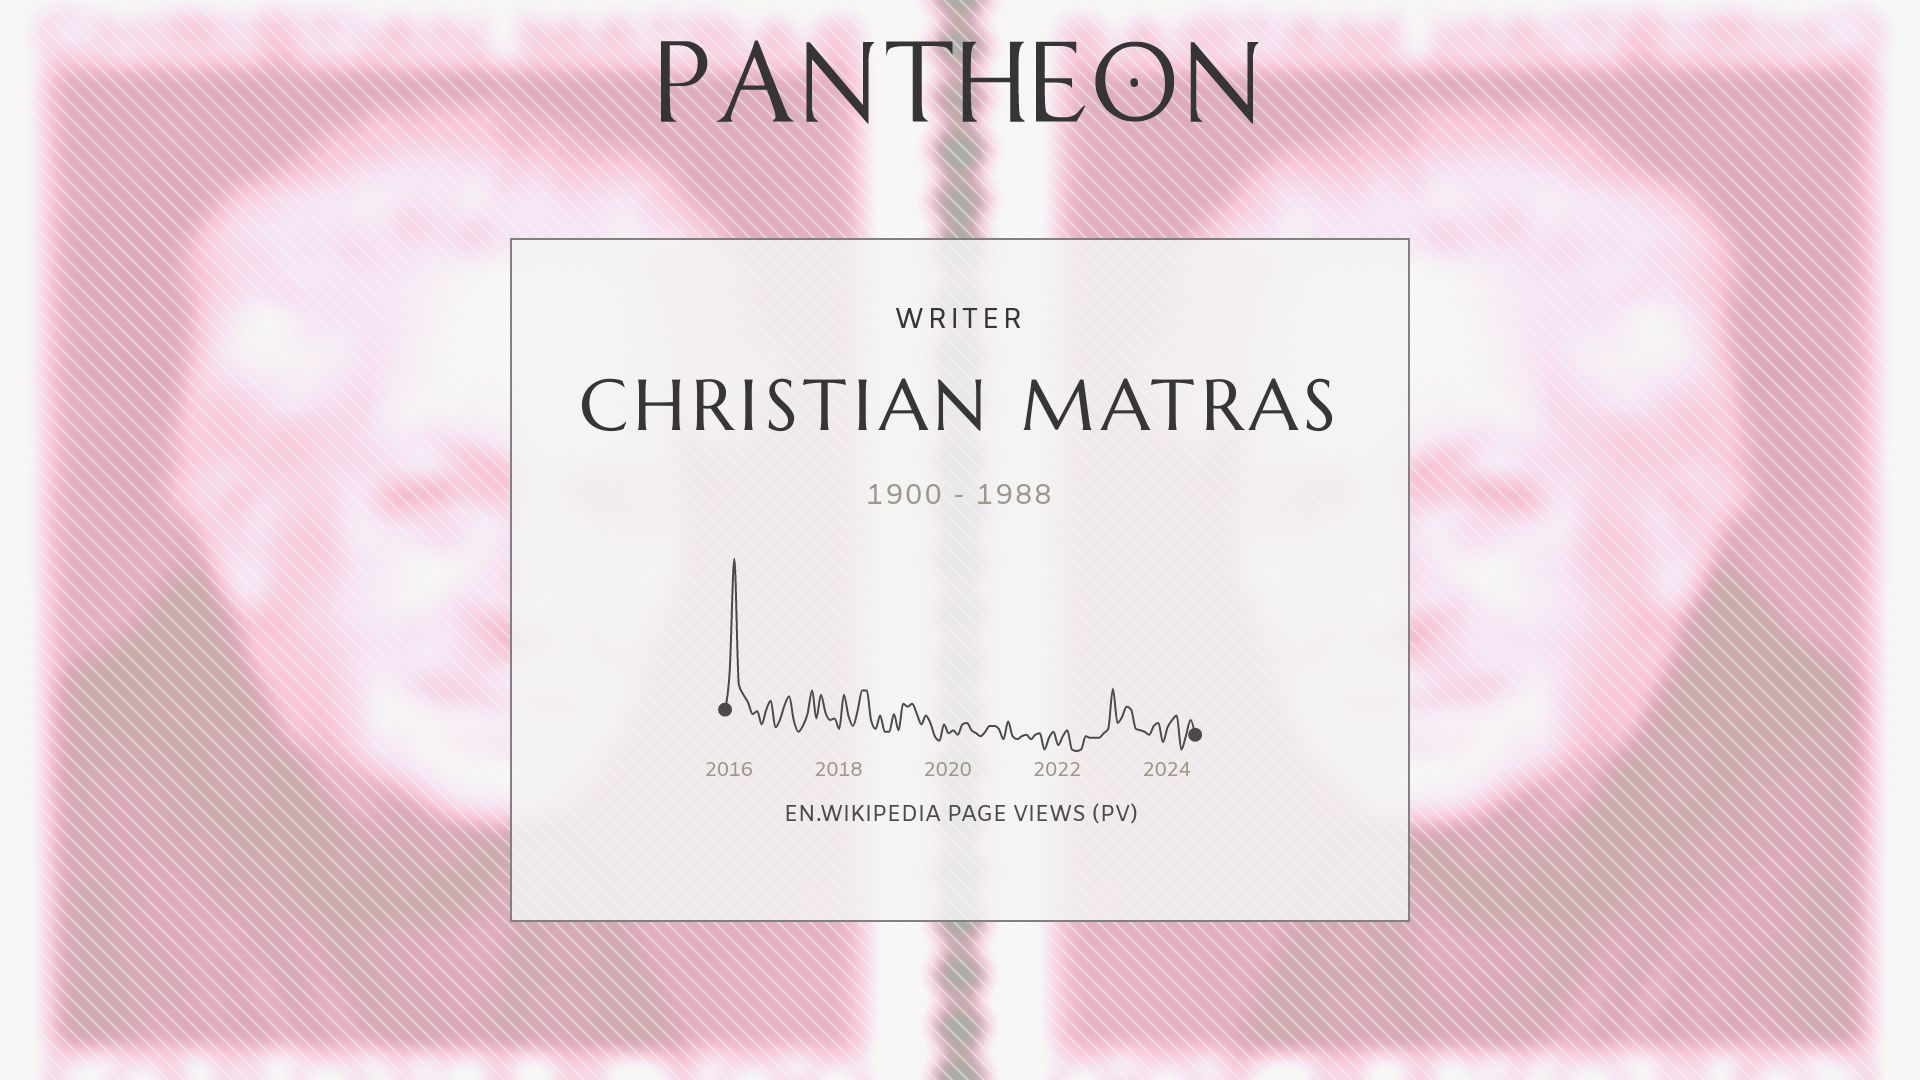 Londen energie diepvries Christian Matras Biography - Topics referred to by the same term | Pantheon